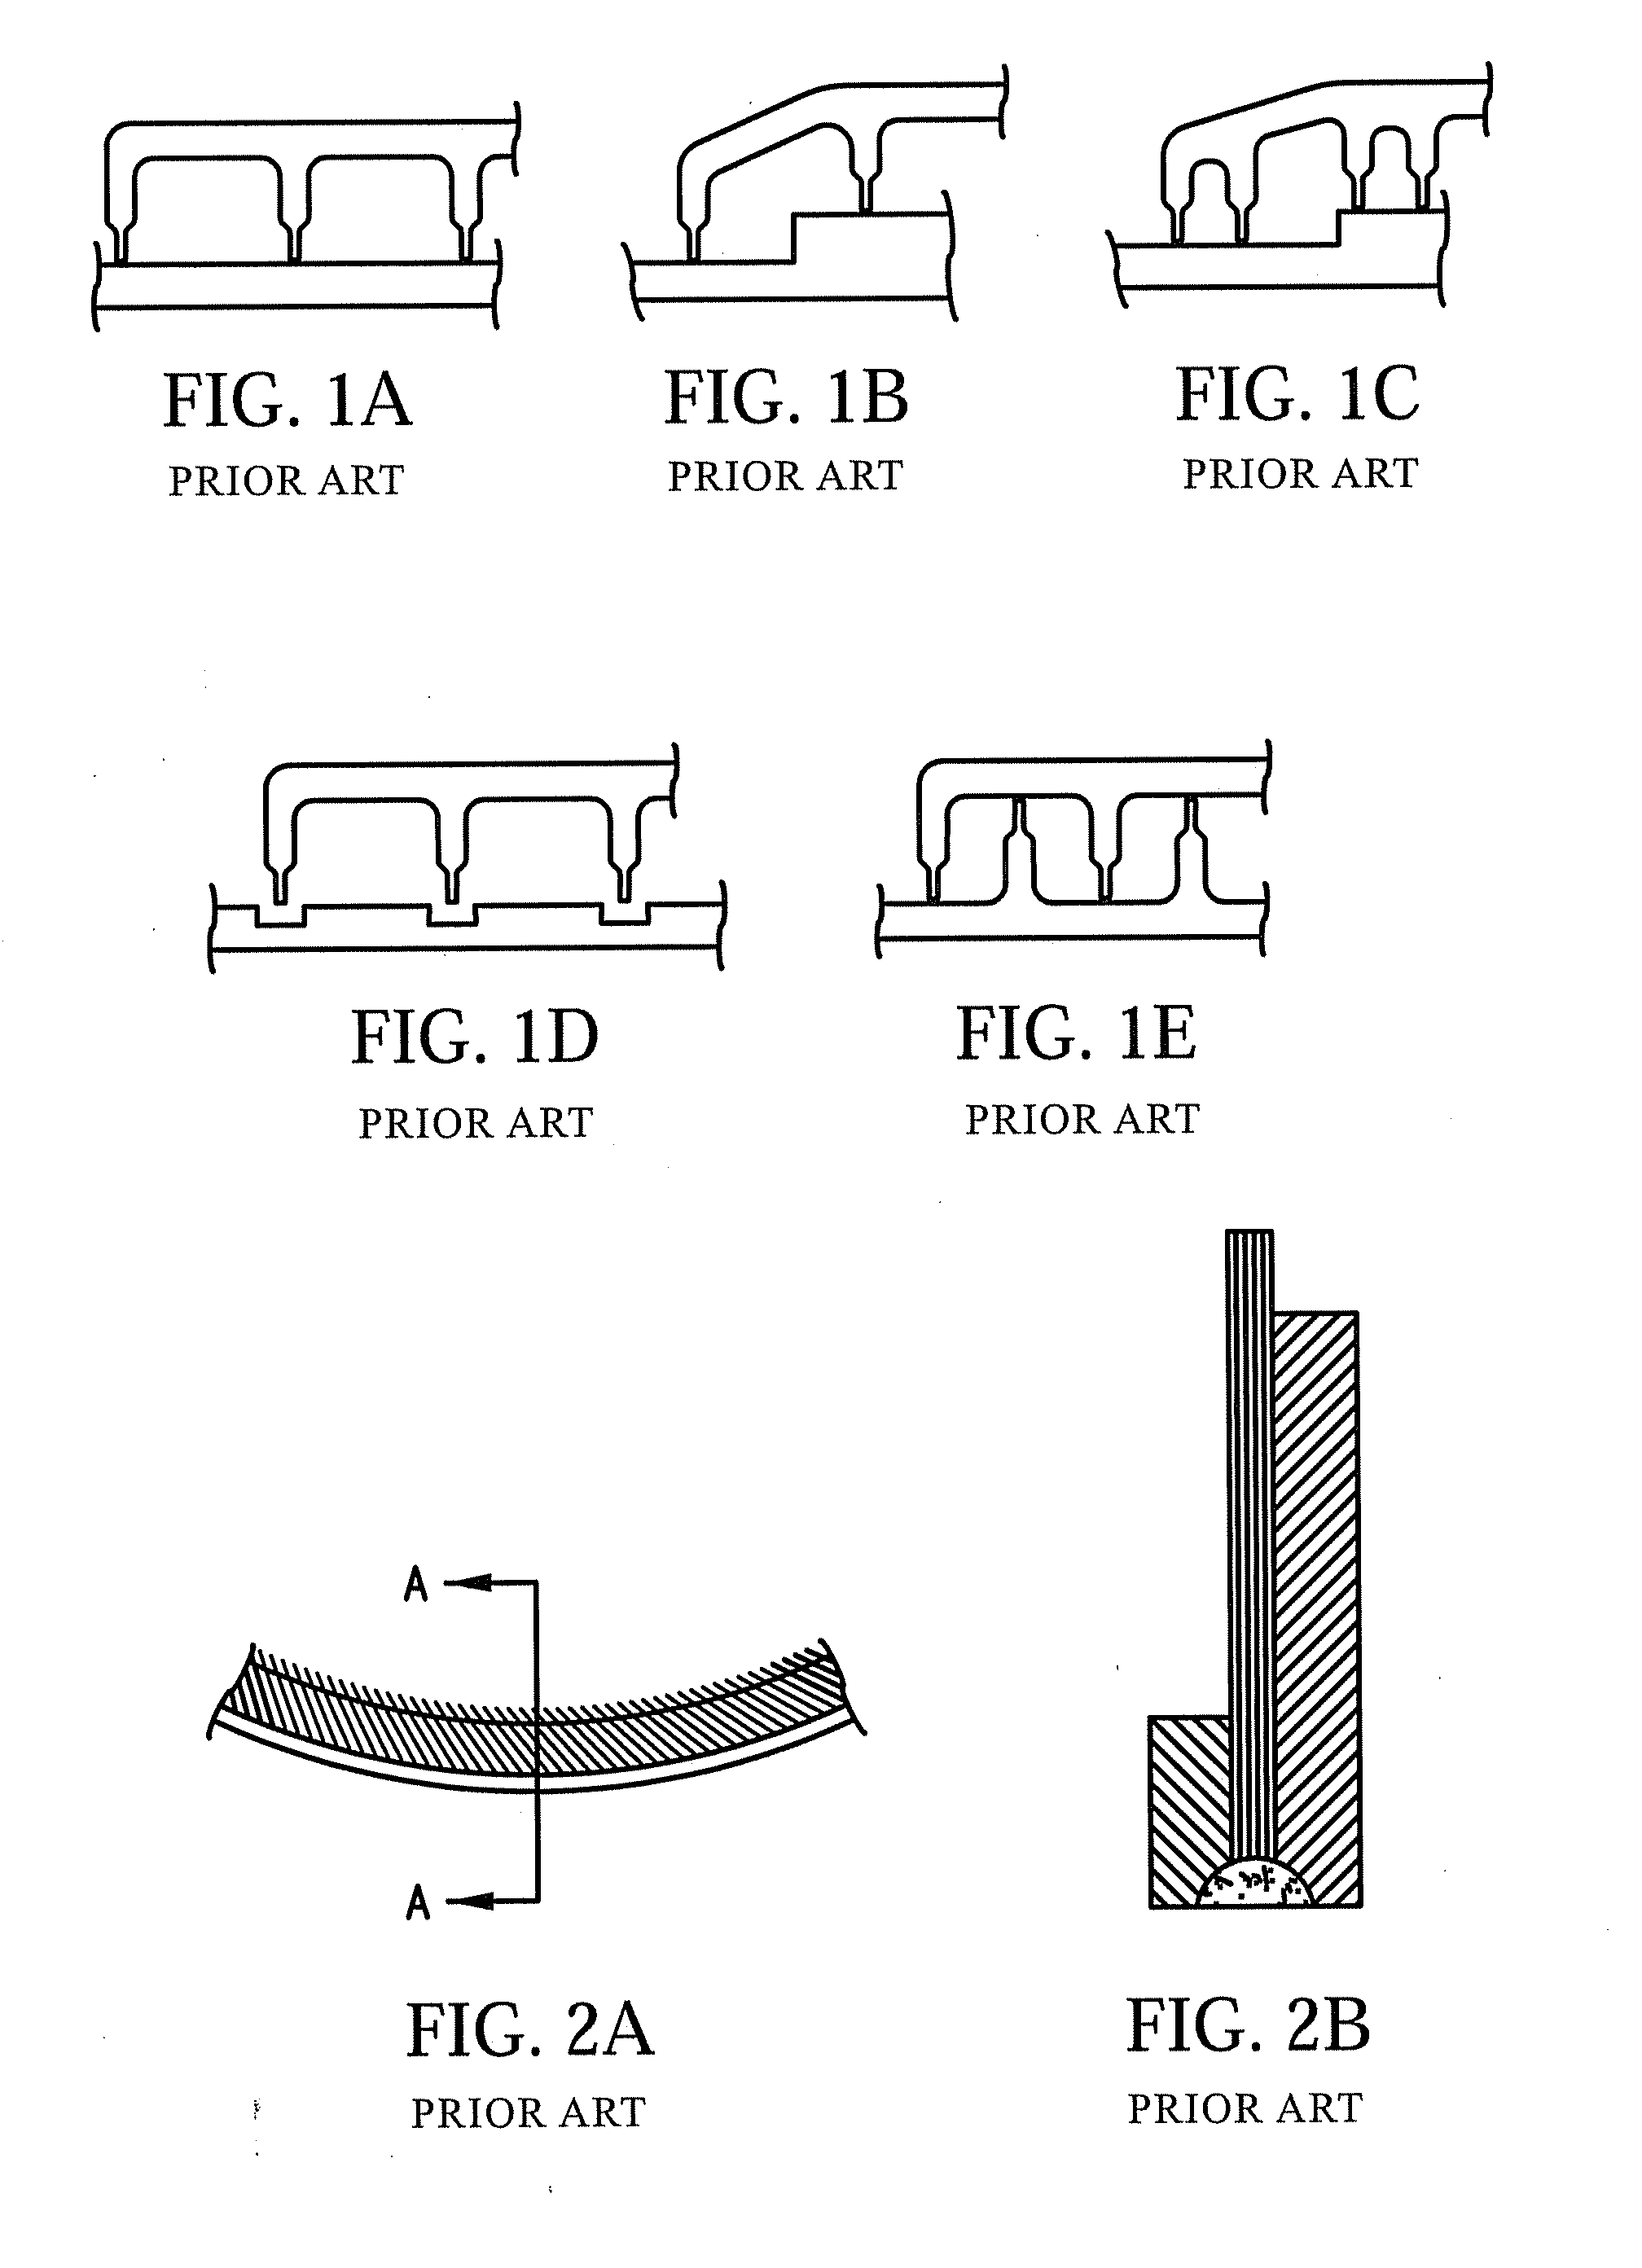 Non-contact seal for a gas turbine engine